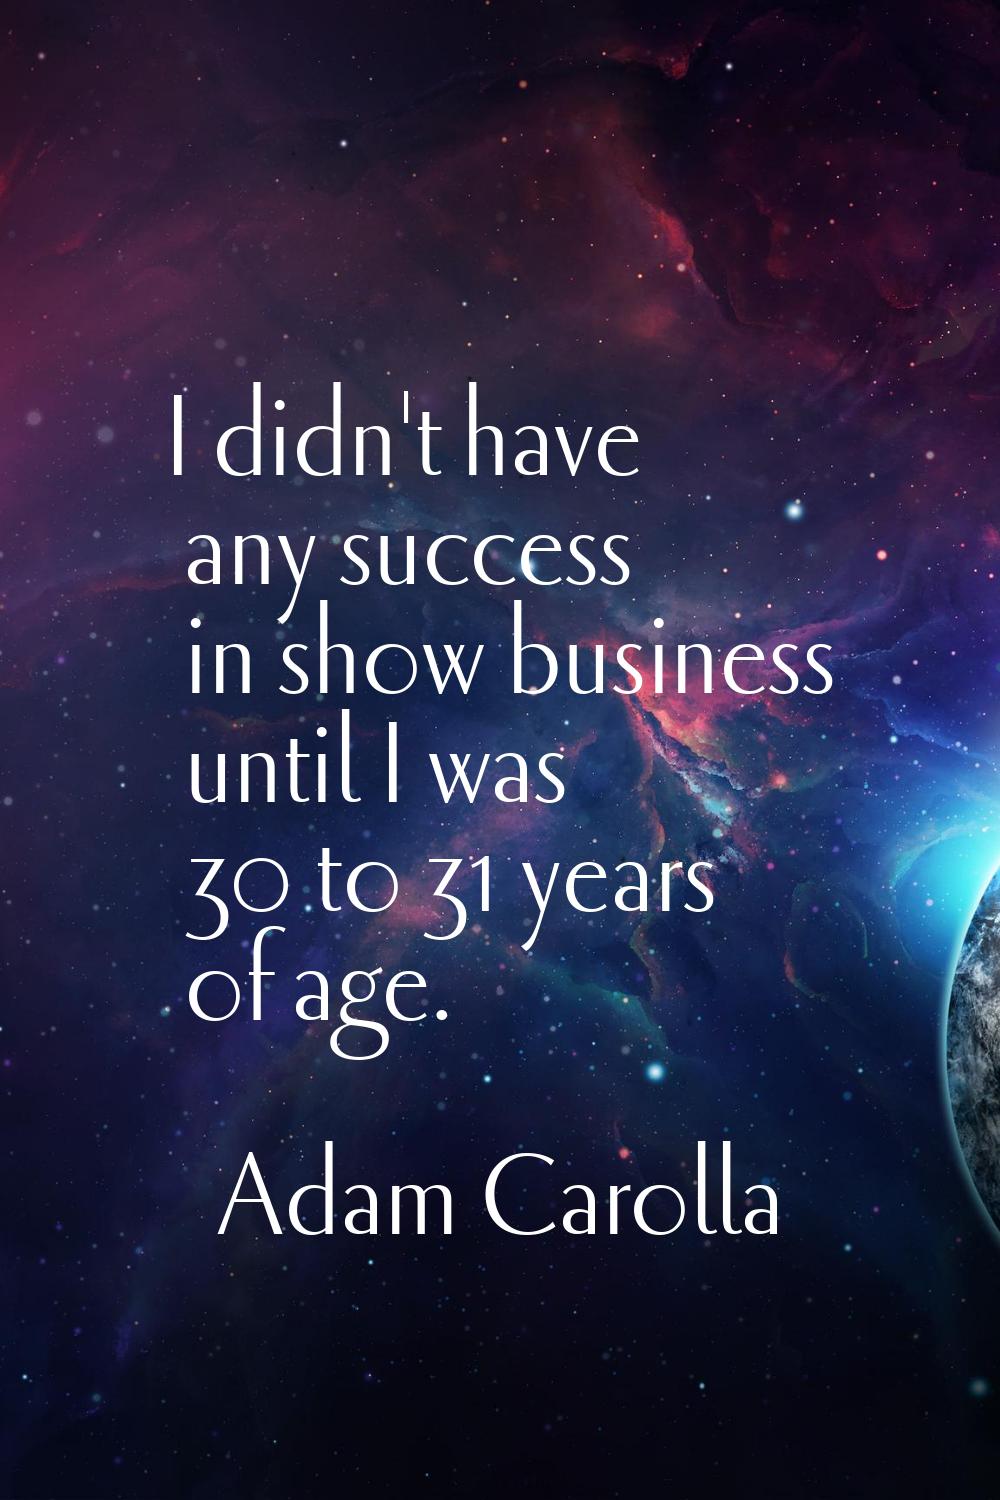 I didn't have any success in show business until I was 30 to 31 years of age.